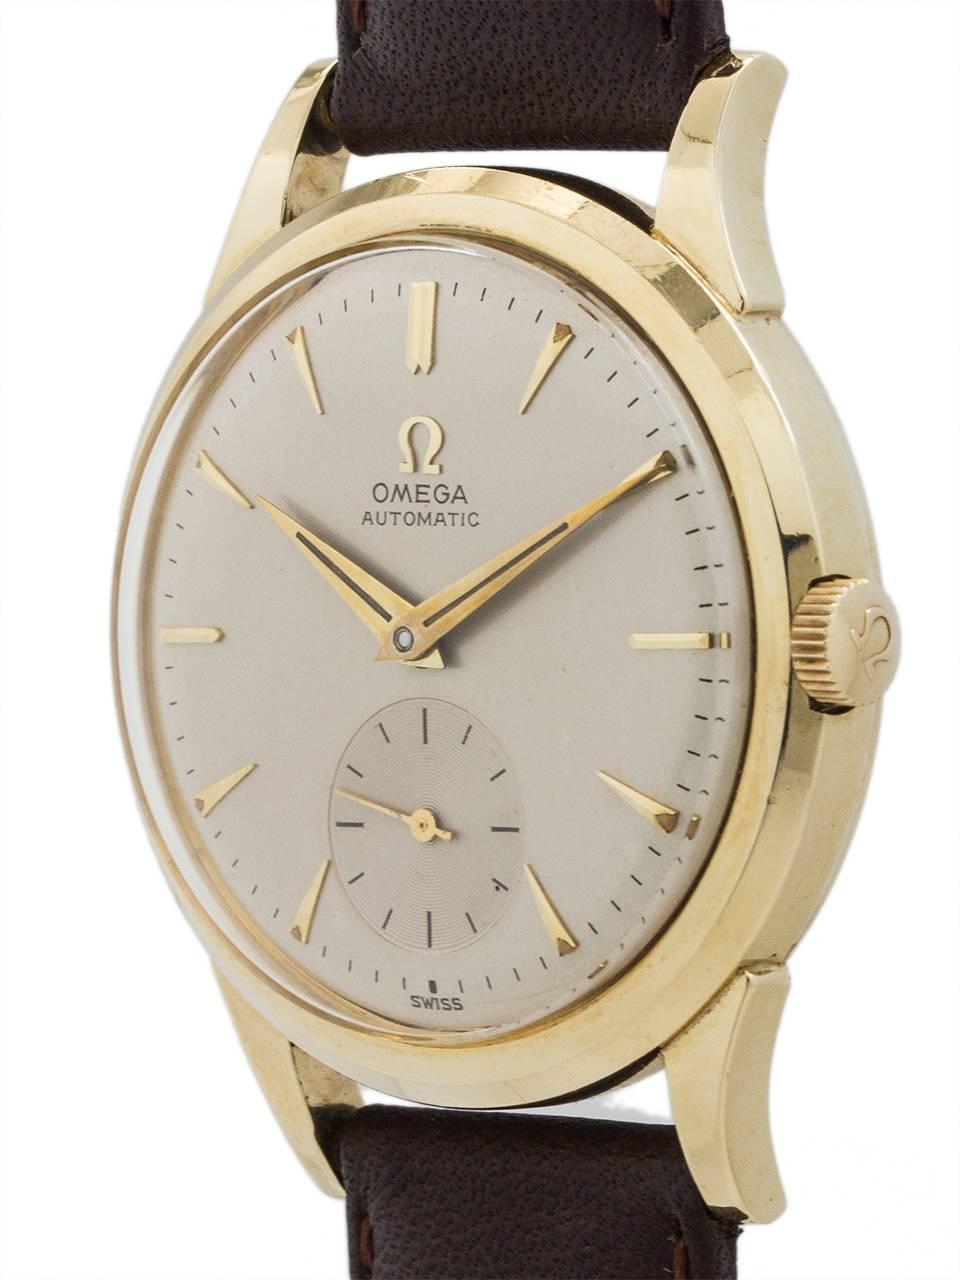 Omega gold shell top and stainless steel screw down caseback, self winding wristwatch circa 1954. Featuring 35 x 42mm screw back case with large tear drop lugs, dome bezel, acrylic crystal, and original 2 tone silvered satin dial with applied baton